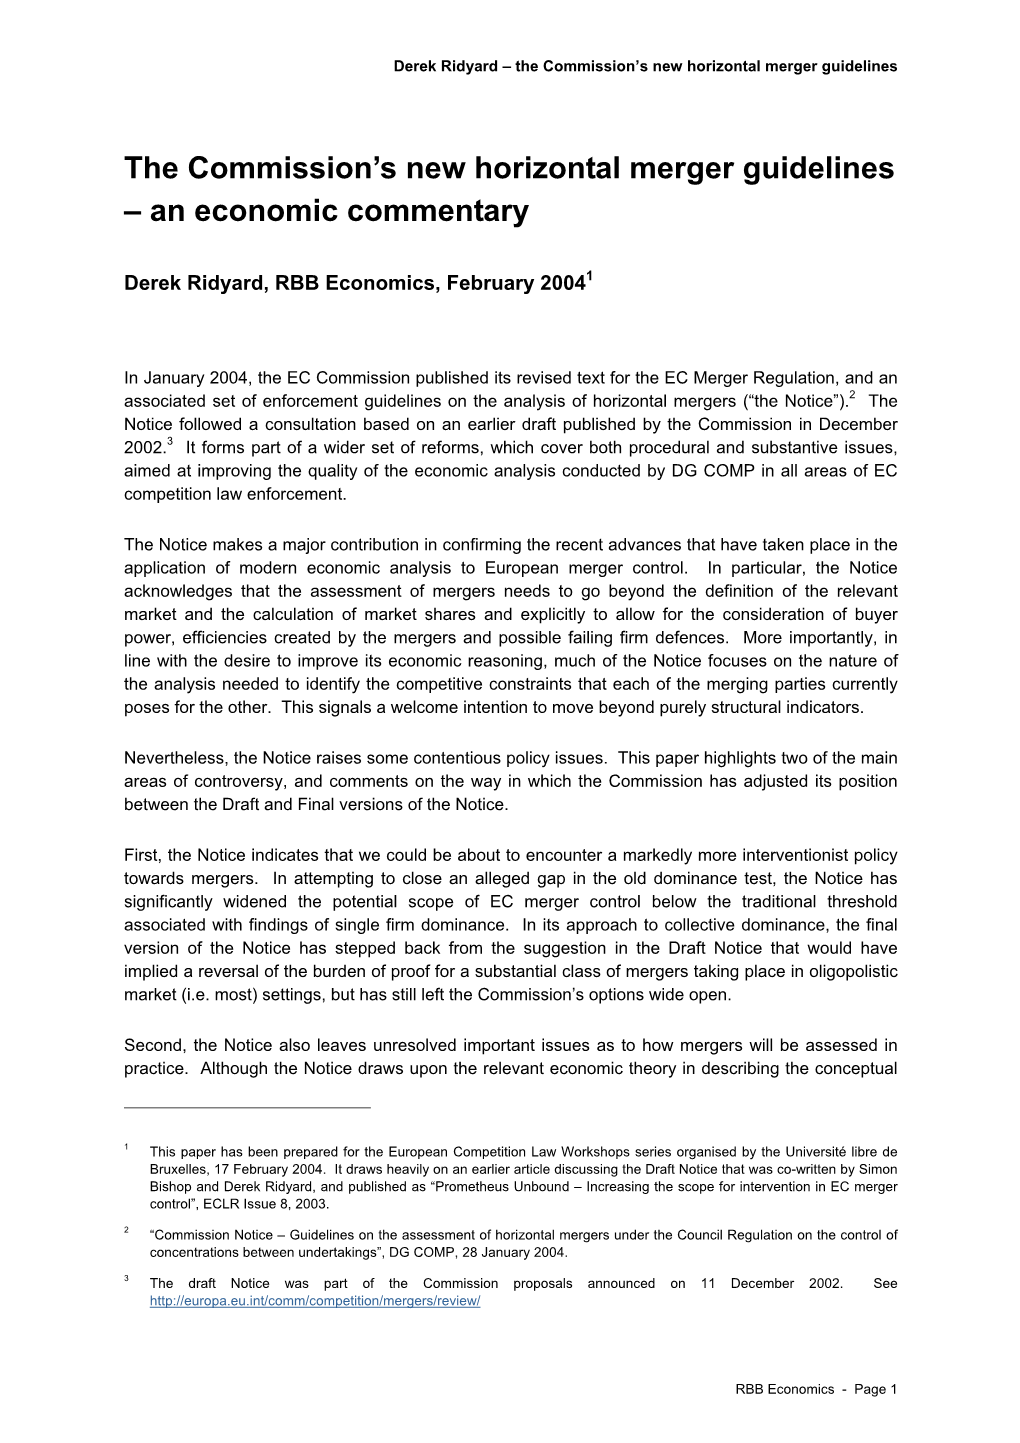 The Commission's New Horizontal Merger Guidelines – an Economic